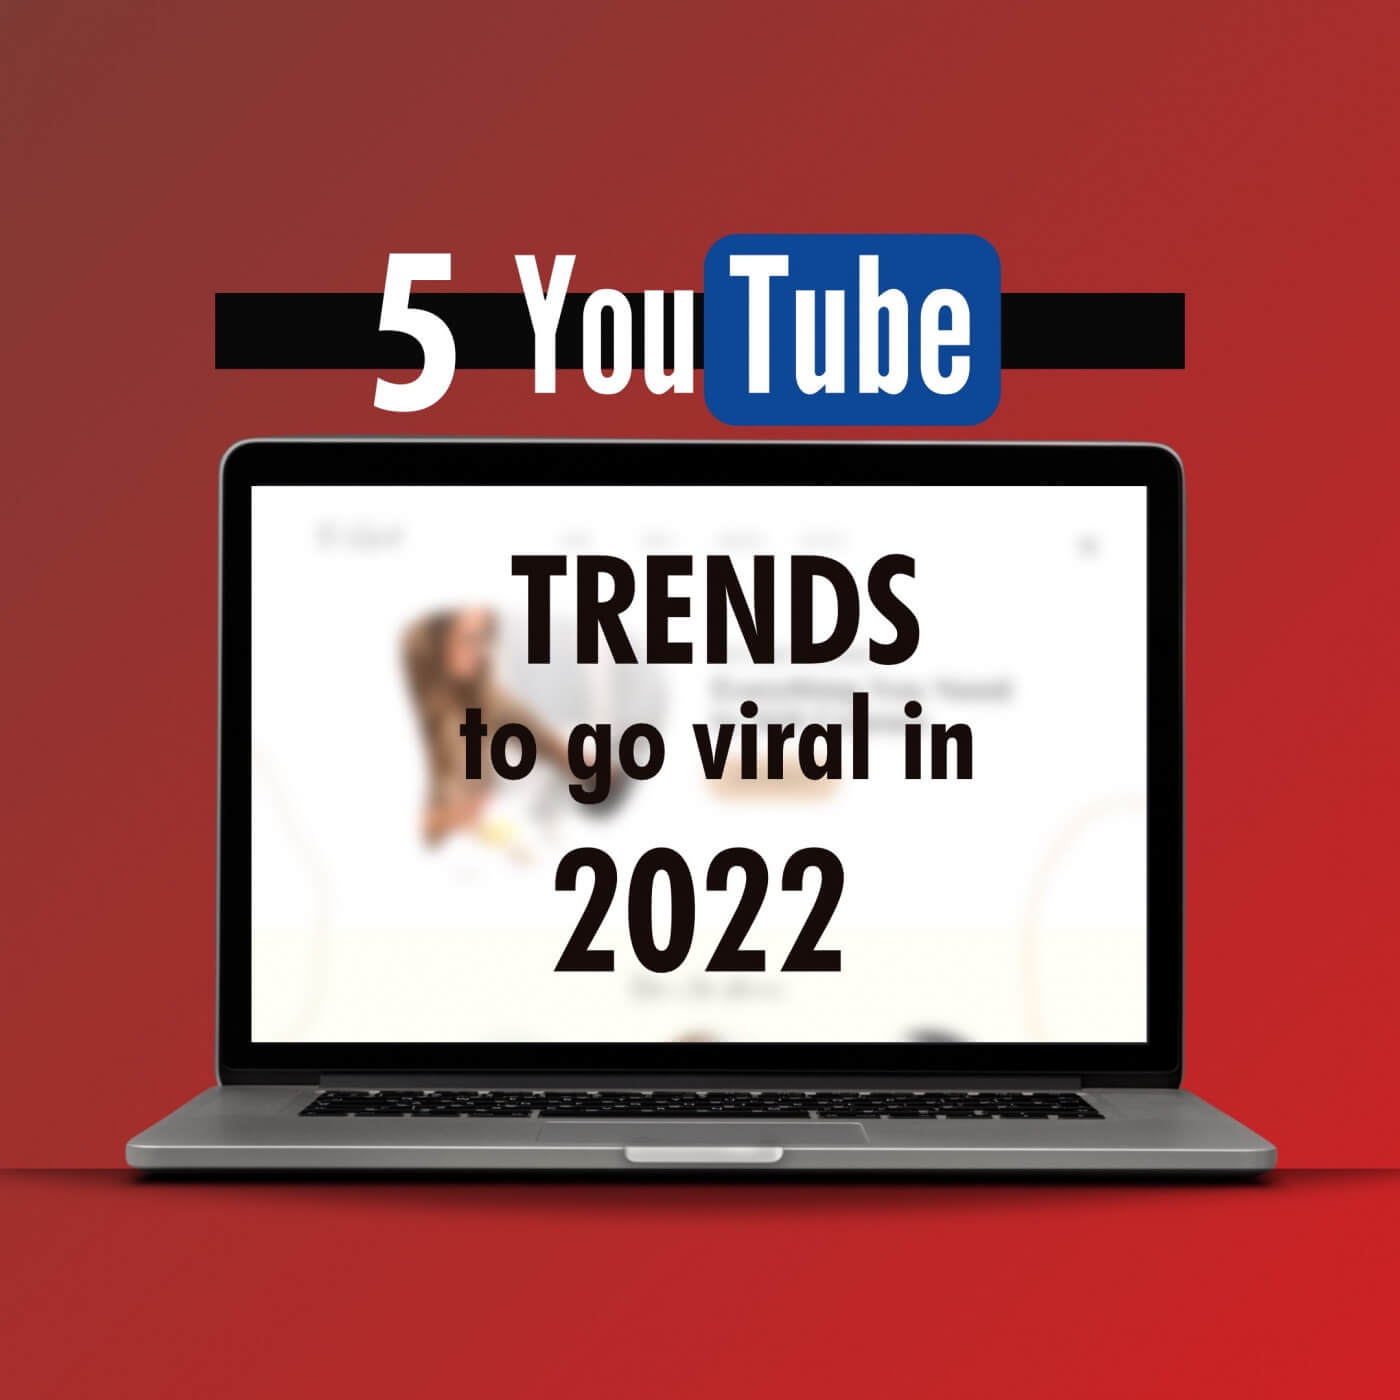 5 Youtube trends to go viral in 2022